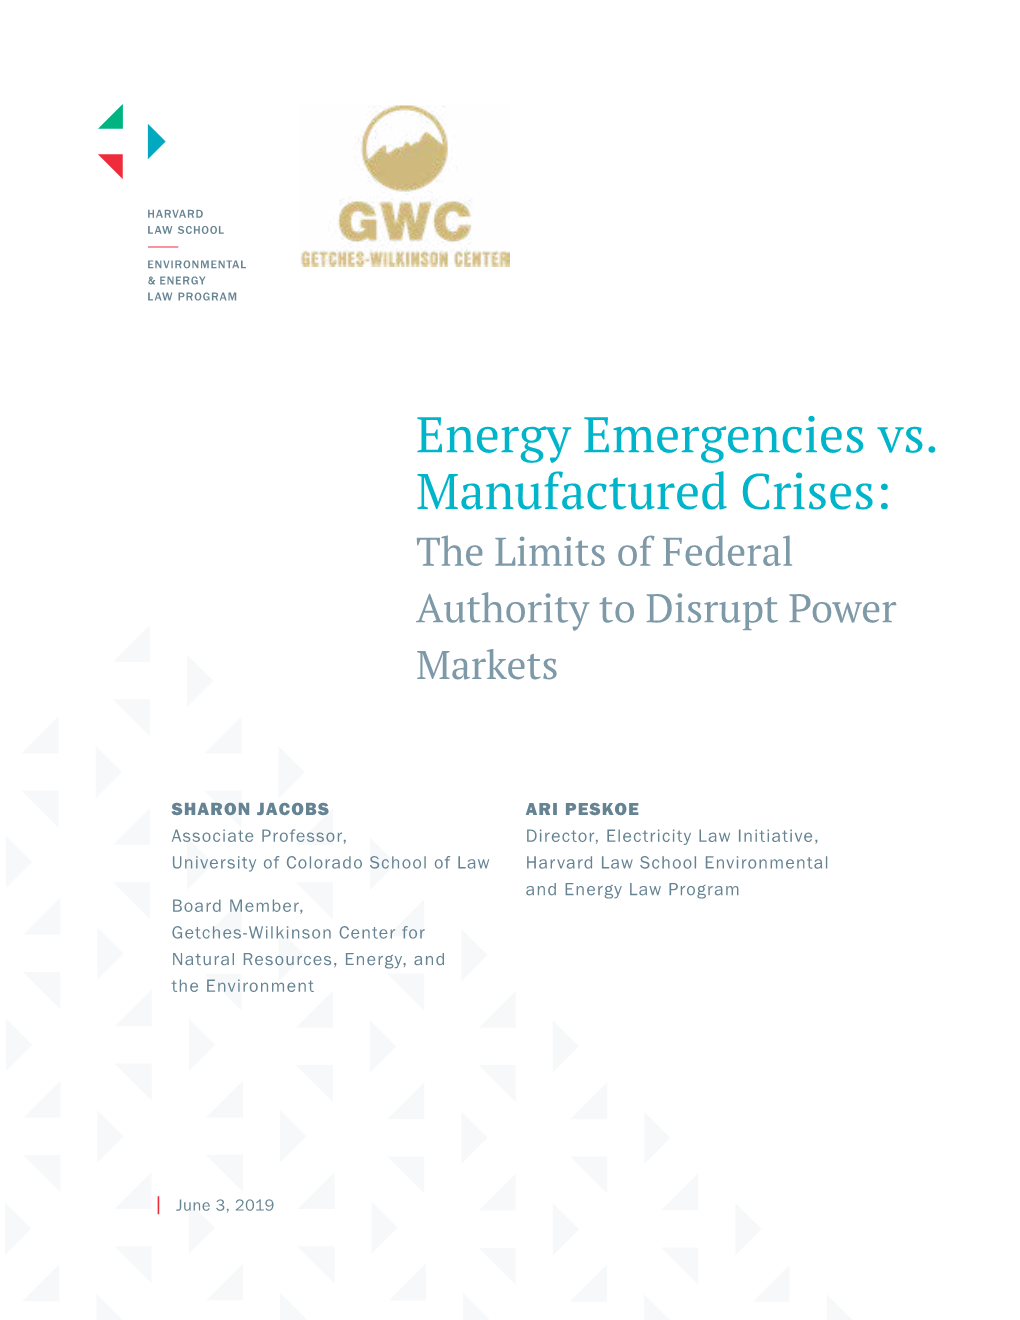 Energy Emergencies Vs. Manufactured Crises: the Limits of Federal Authority to Disrupt Power Markets